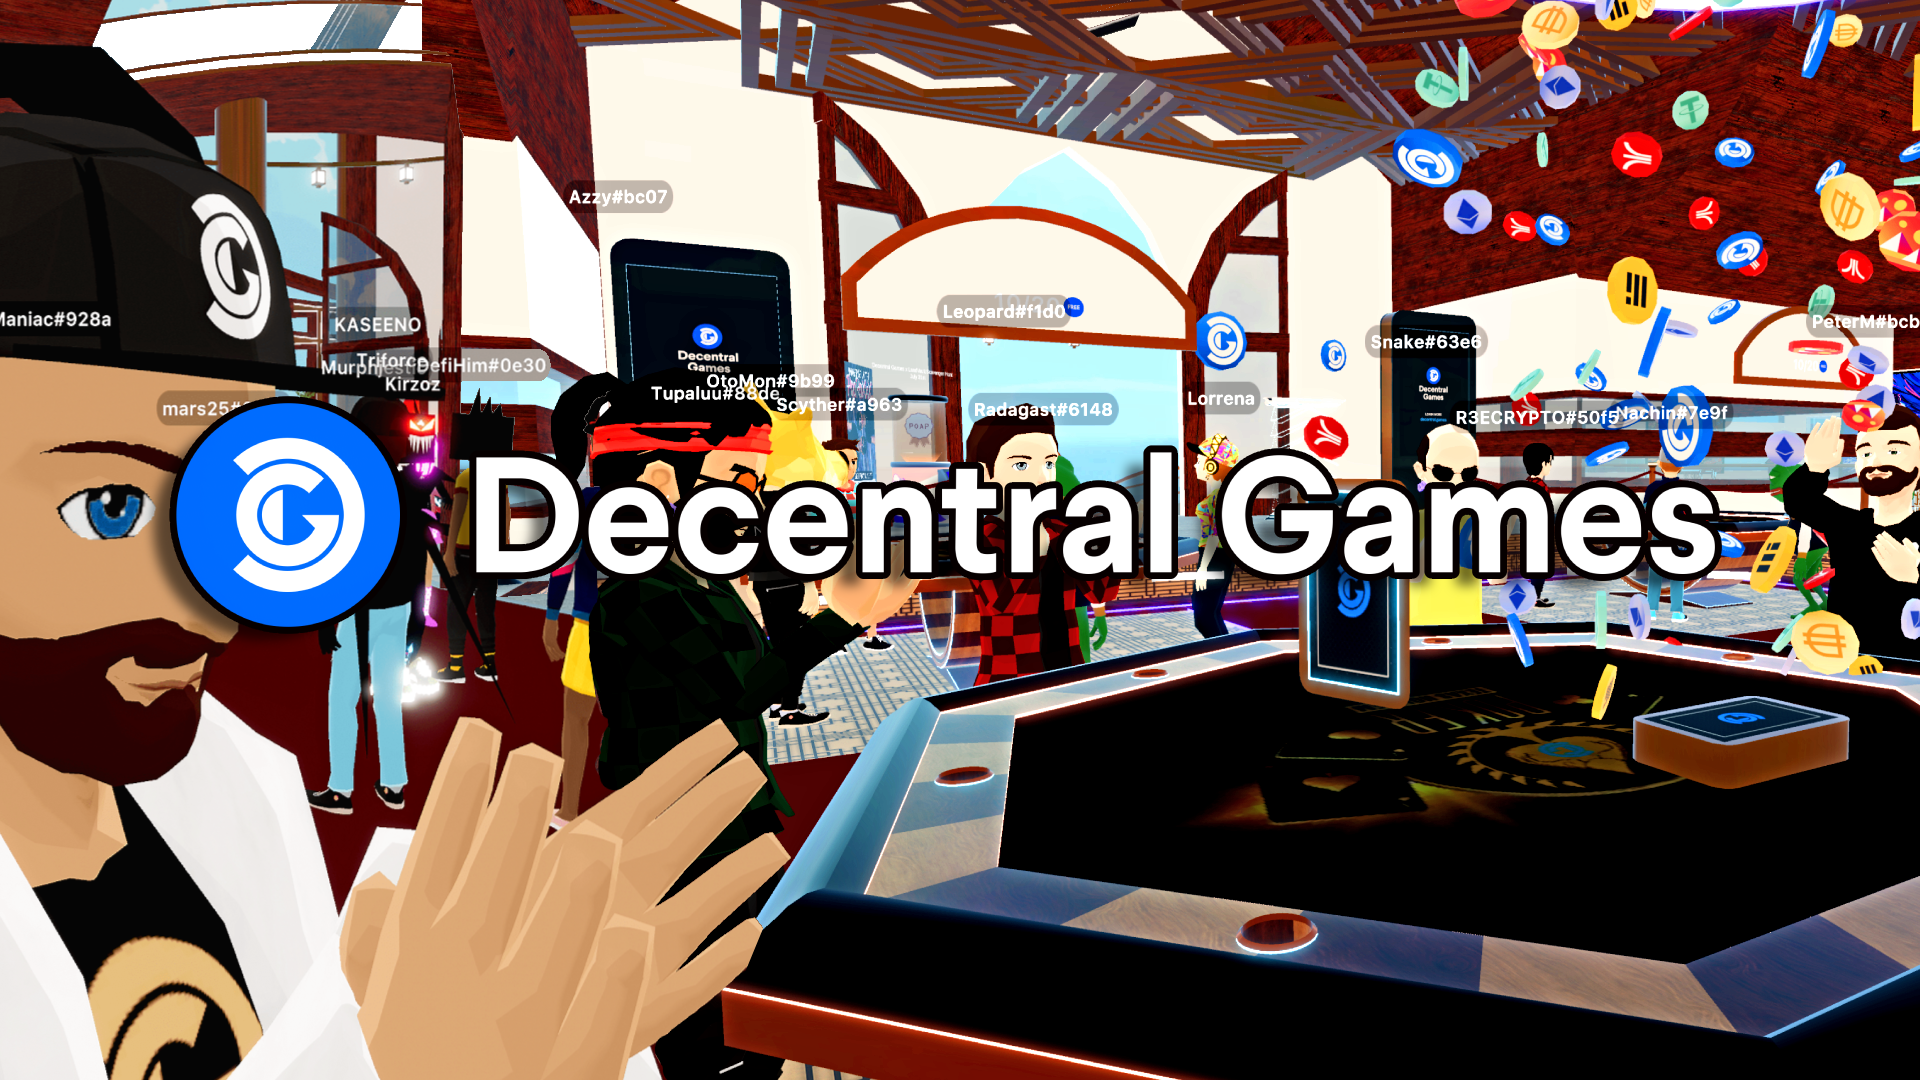 Decentral Games' gamers gathered around the Poker table in Decentral Games in their avatar forms